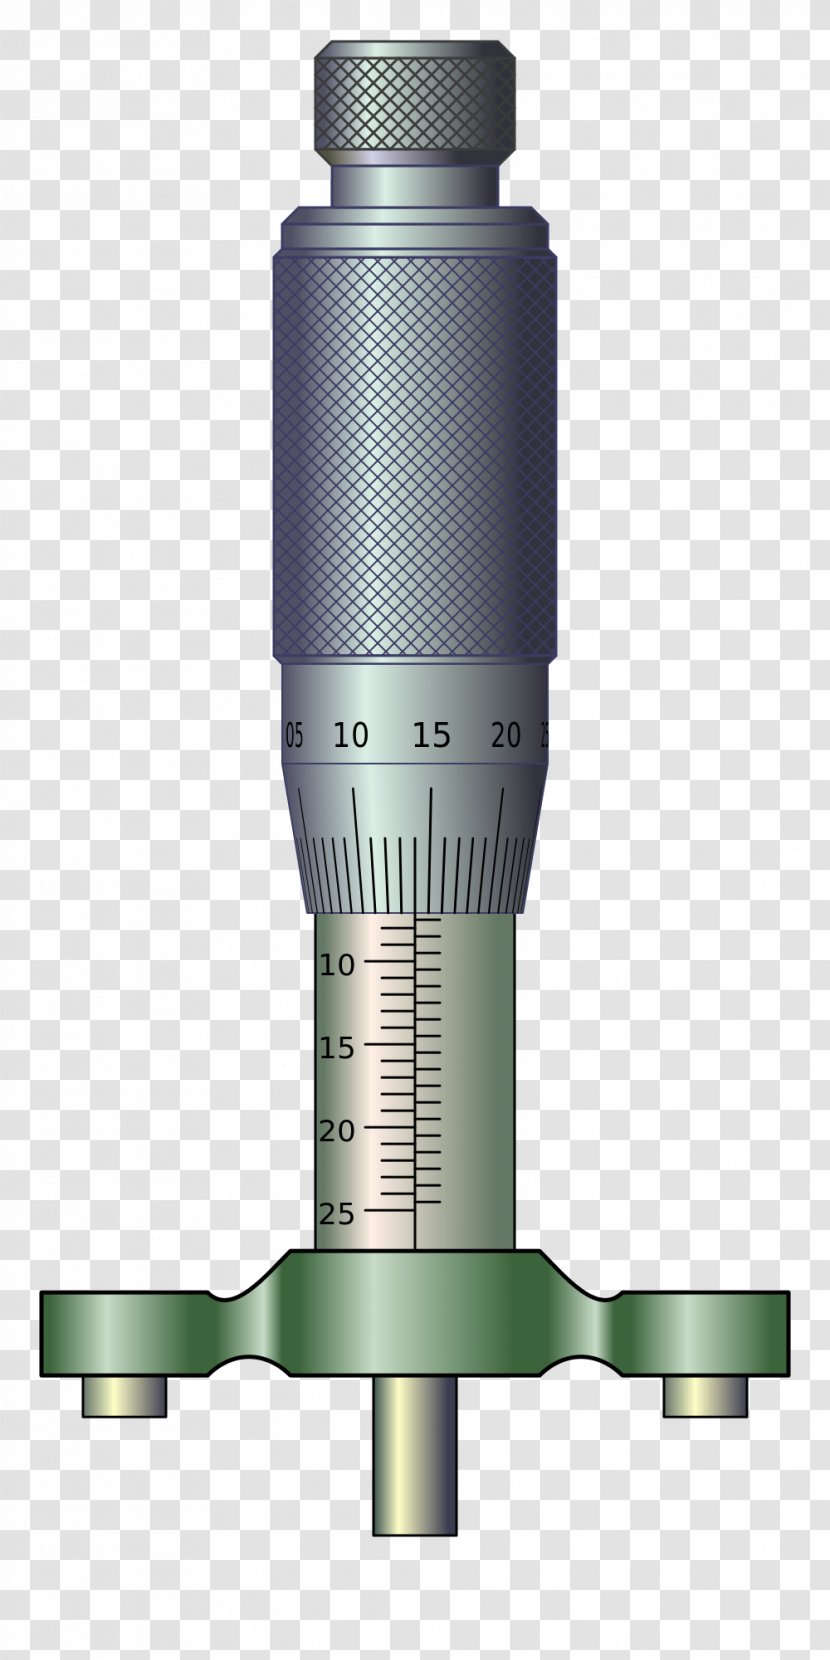 Micrometer Cylinder - Tool Accessory Transparent PNG